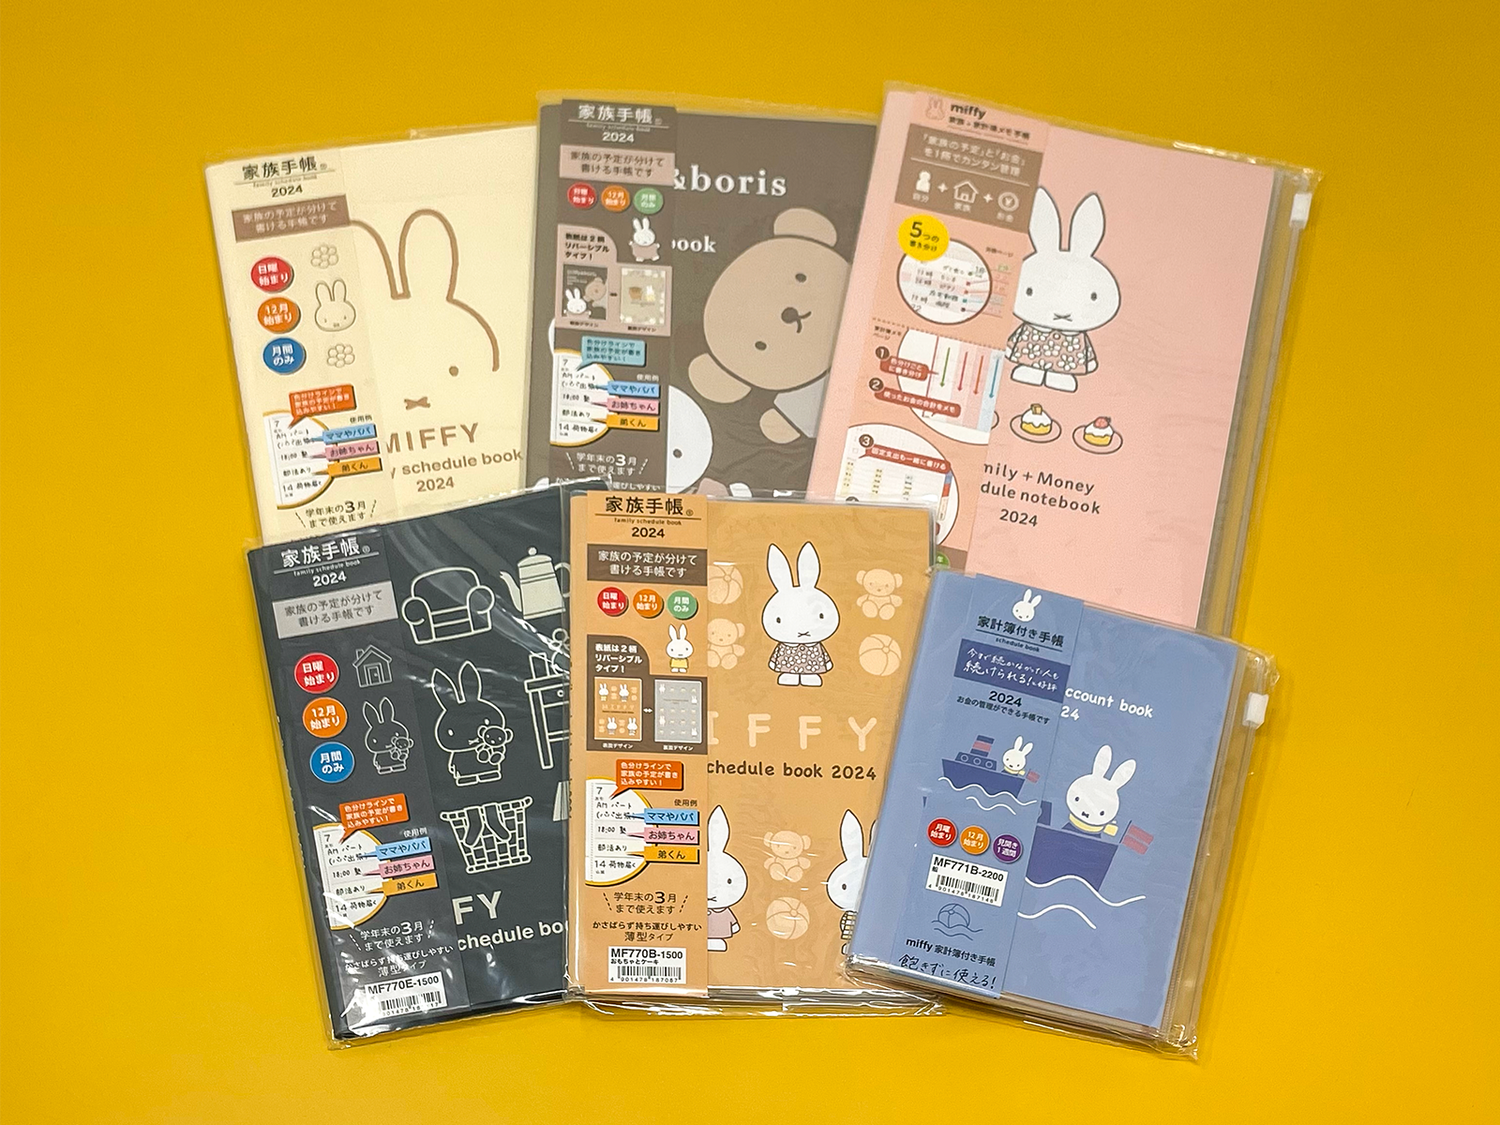 https://images.squarespace-cdn.com/content/v1/571abd61e3214001fb3b9966/1698103981938-V10GTA85IKSM2DXUWP7T/Miffy+Schedule+Notebooks+6.png?format=1500w